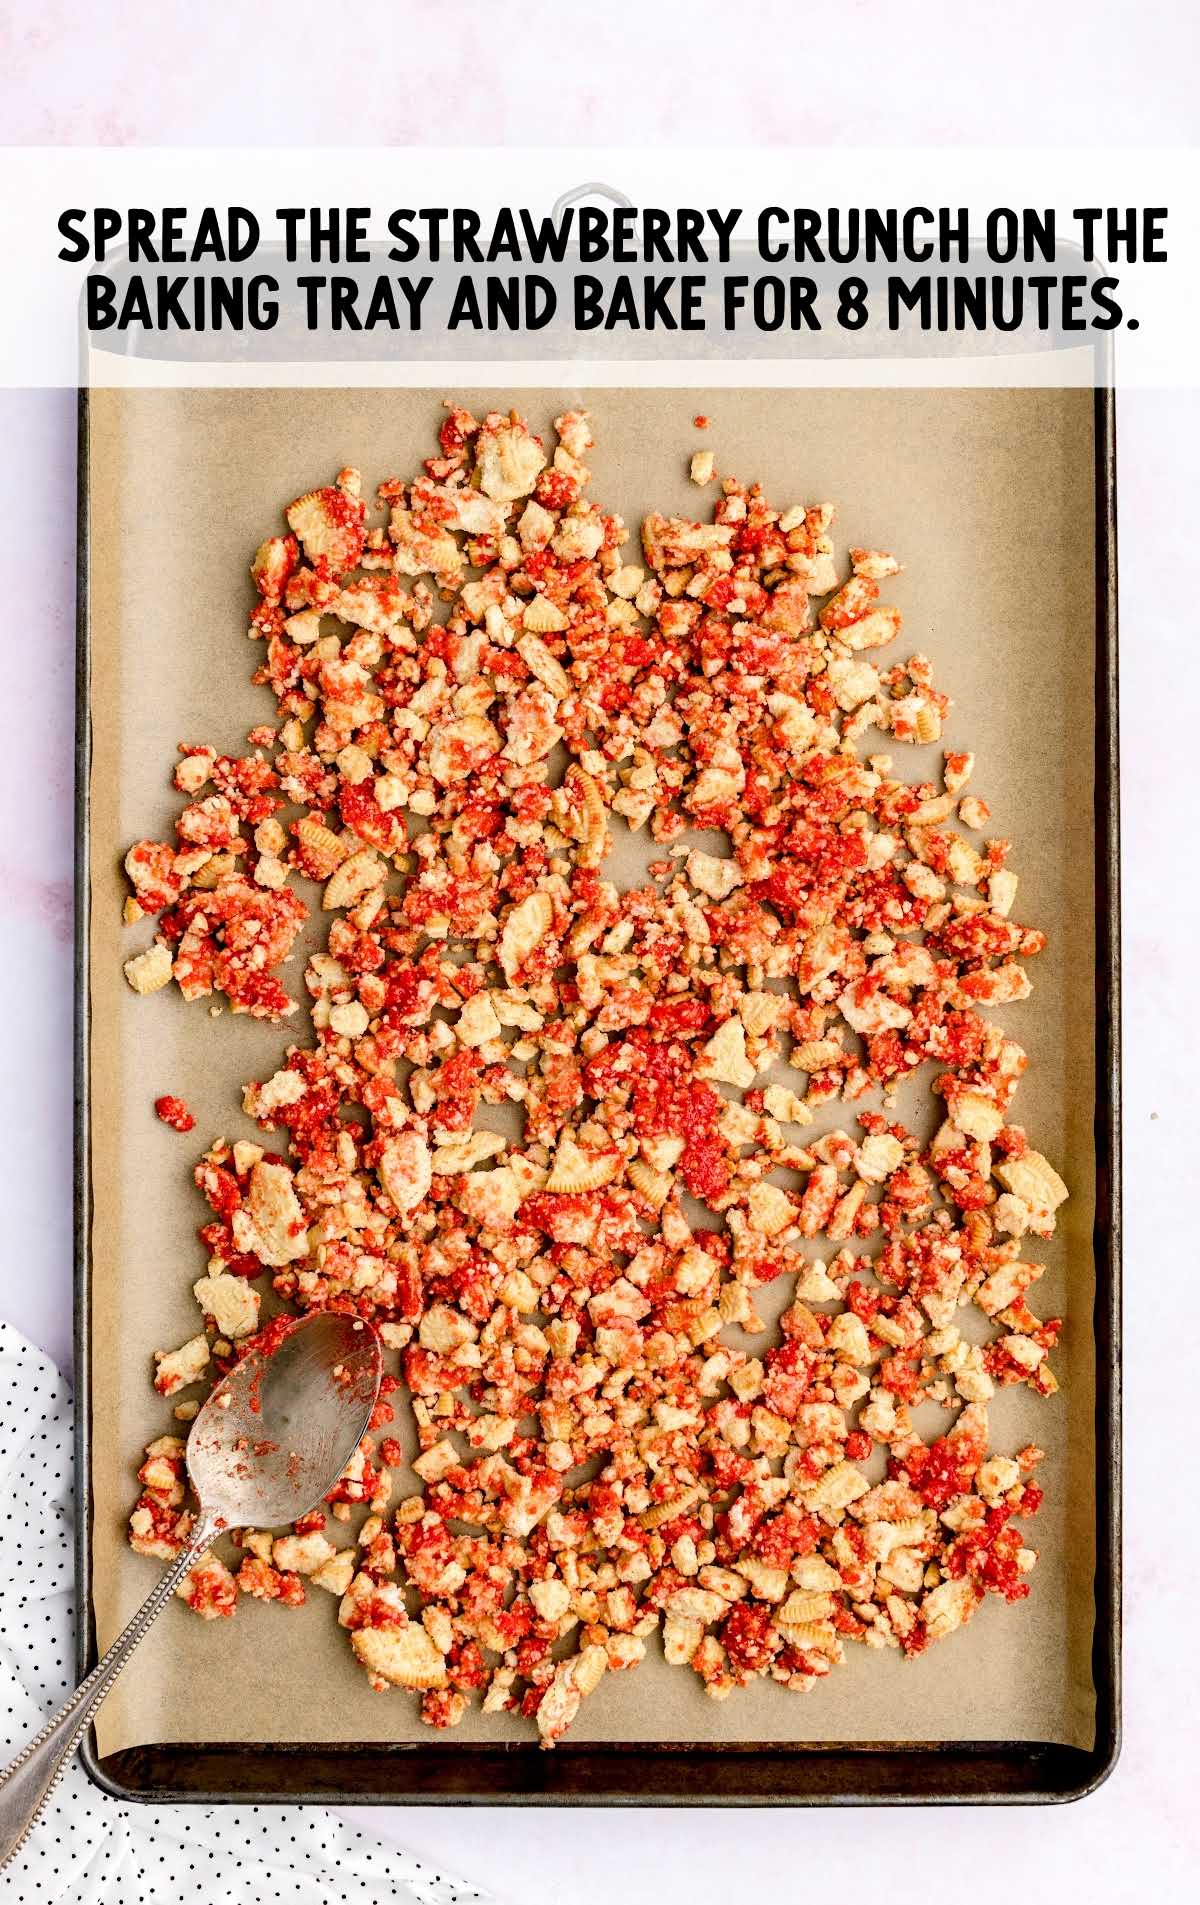 strawberry crunch spread on the baking tray